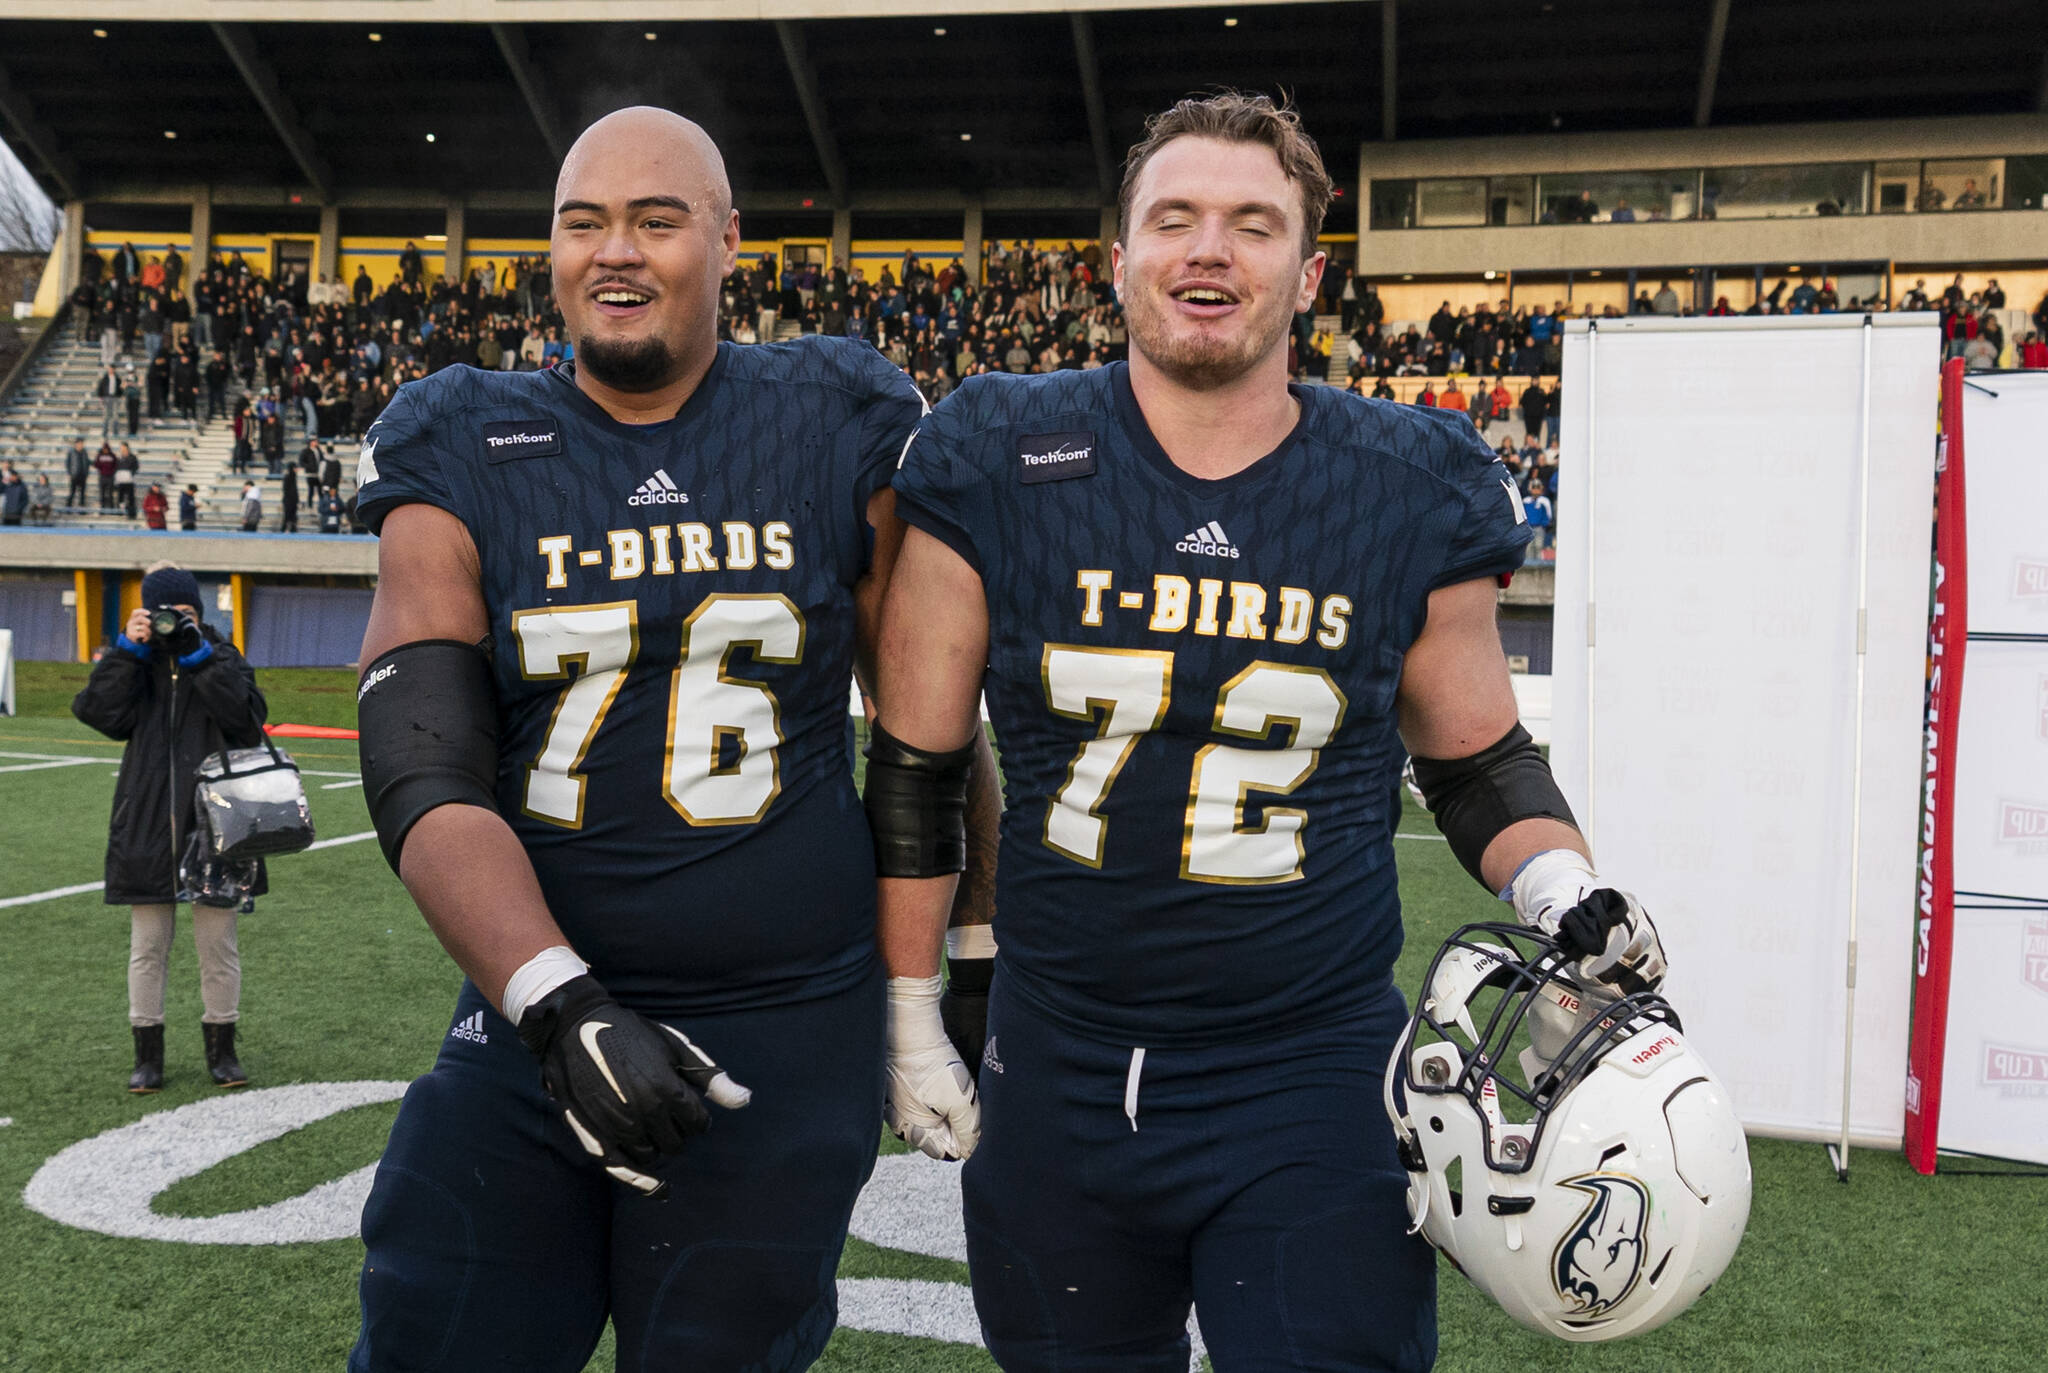 UBC offensive linemen Giovanni Manu (left) and Theo Benedet (right) are both up for the NFL Draft which takes place this weekend. The pair is shown here during Hardy Cup Finals action in Vancouver, Nov. 11, 2024. (Rich Lam/UBC Athletics Photo)